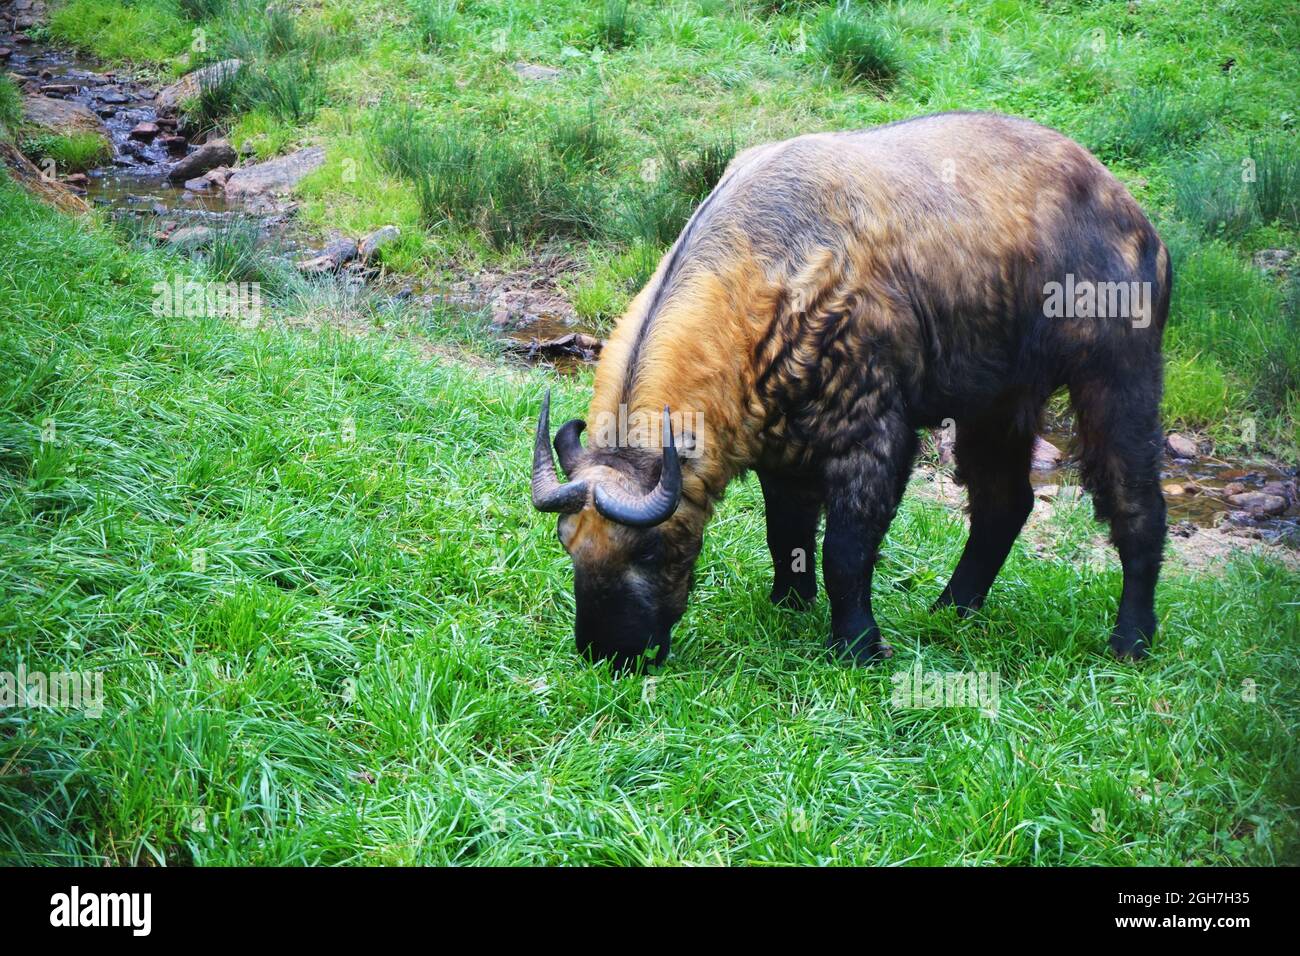 Mature Takin (Bhutan’s national animal) grazing on a hill in the Motithang Takin Preserve (also known as the Royal Takin Preserve), Thimphu, Bhutan. Stock Photo